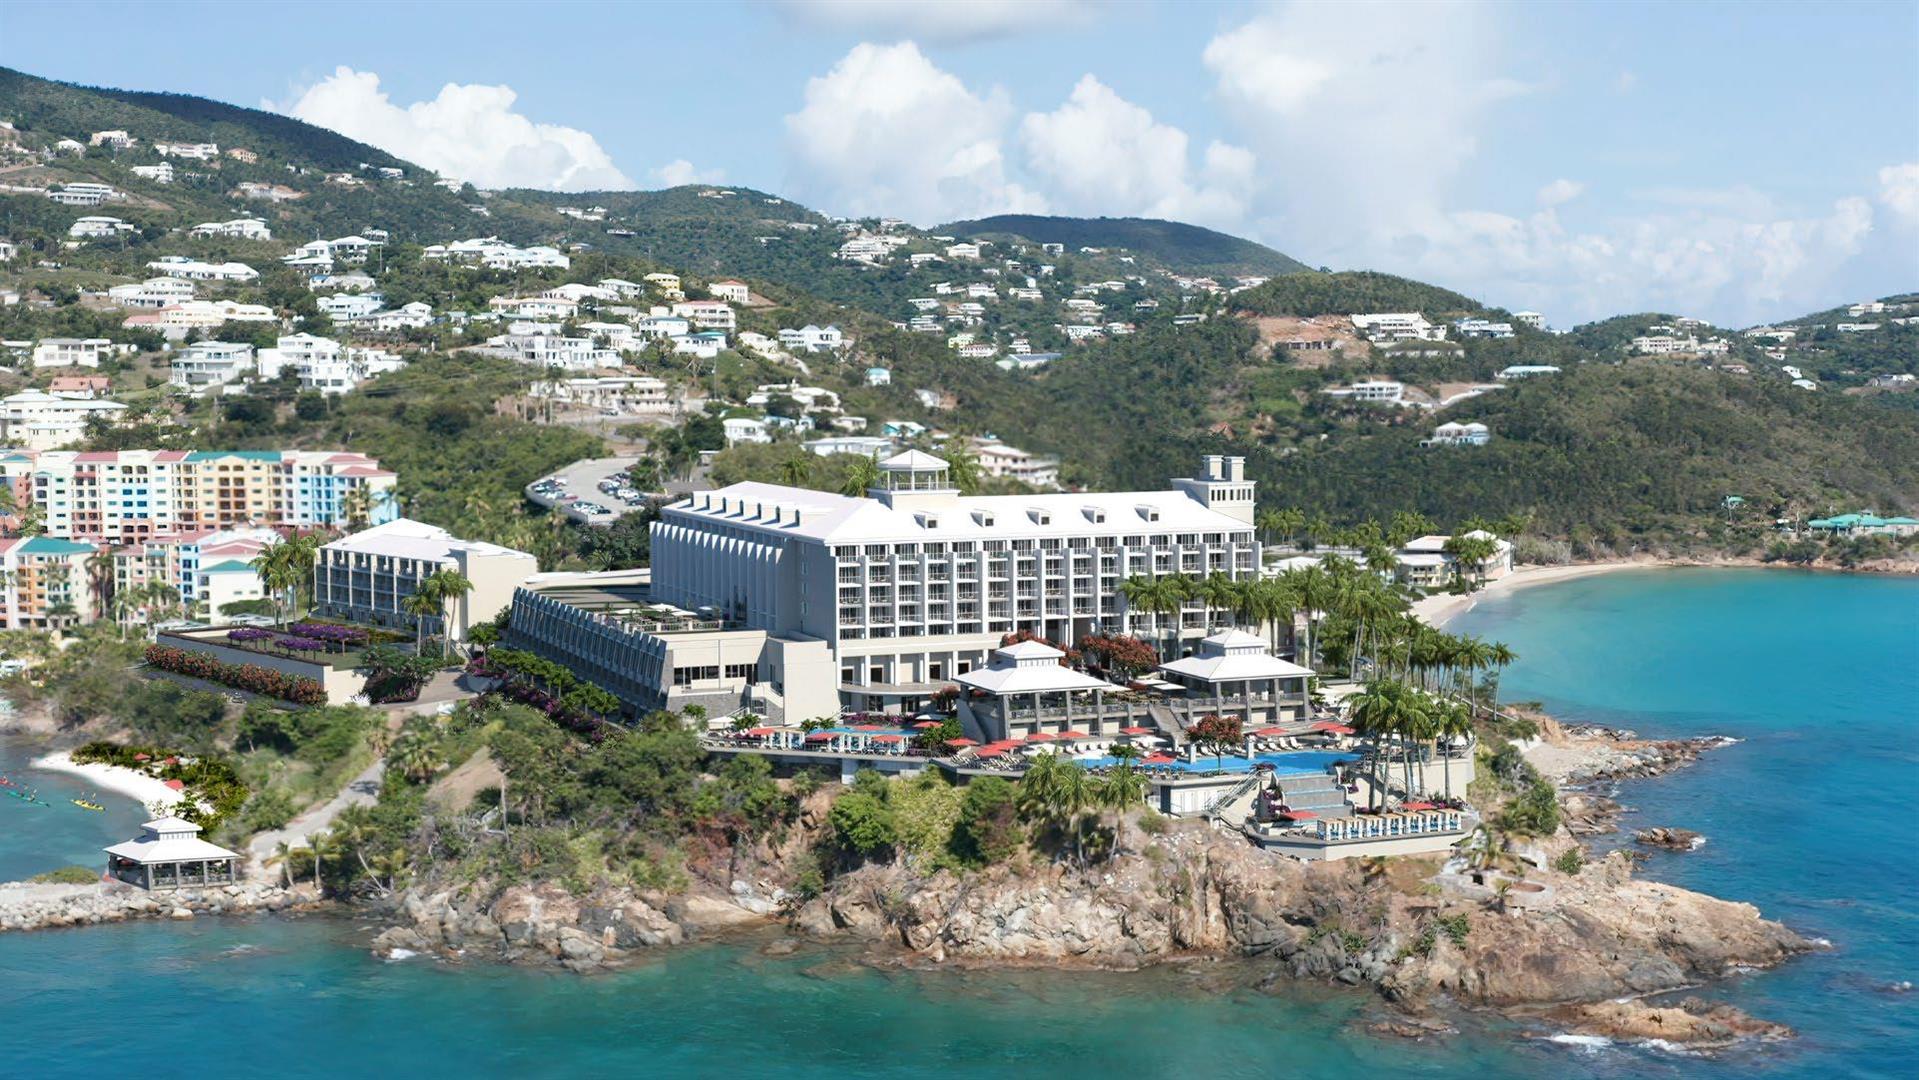 The Westin Beach Resort & Spa, at Frenchman's Reef in St. Thomas, VI